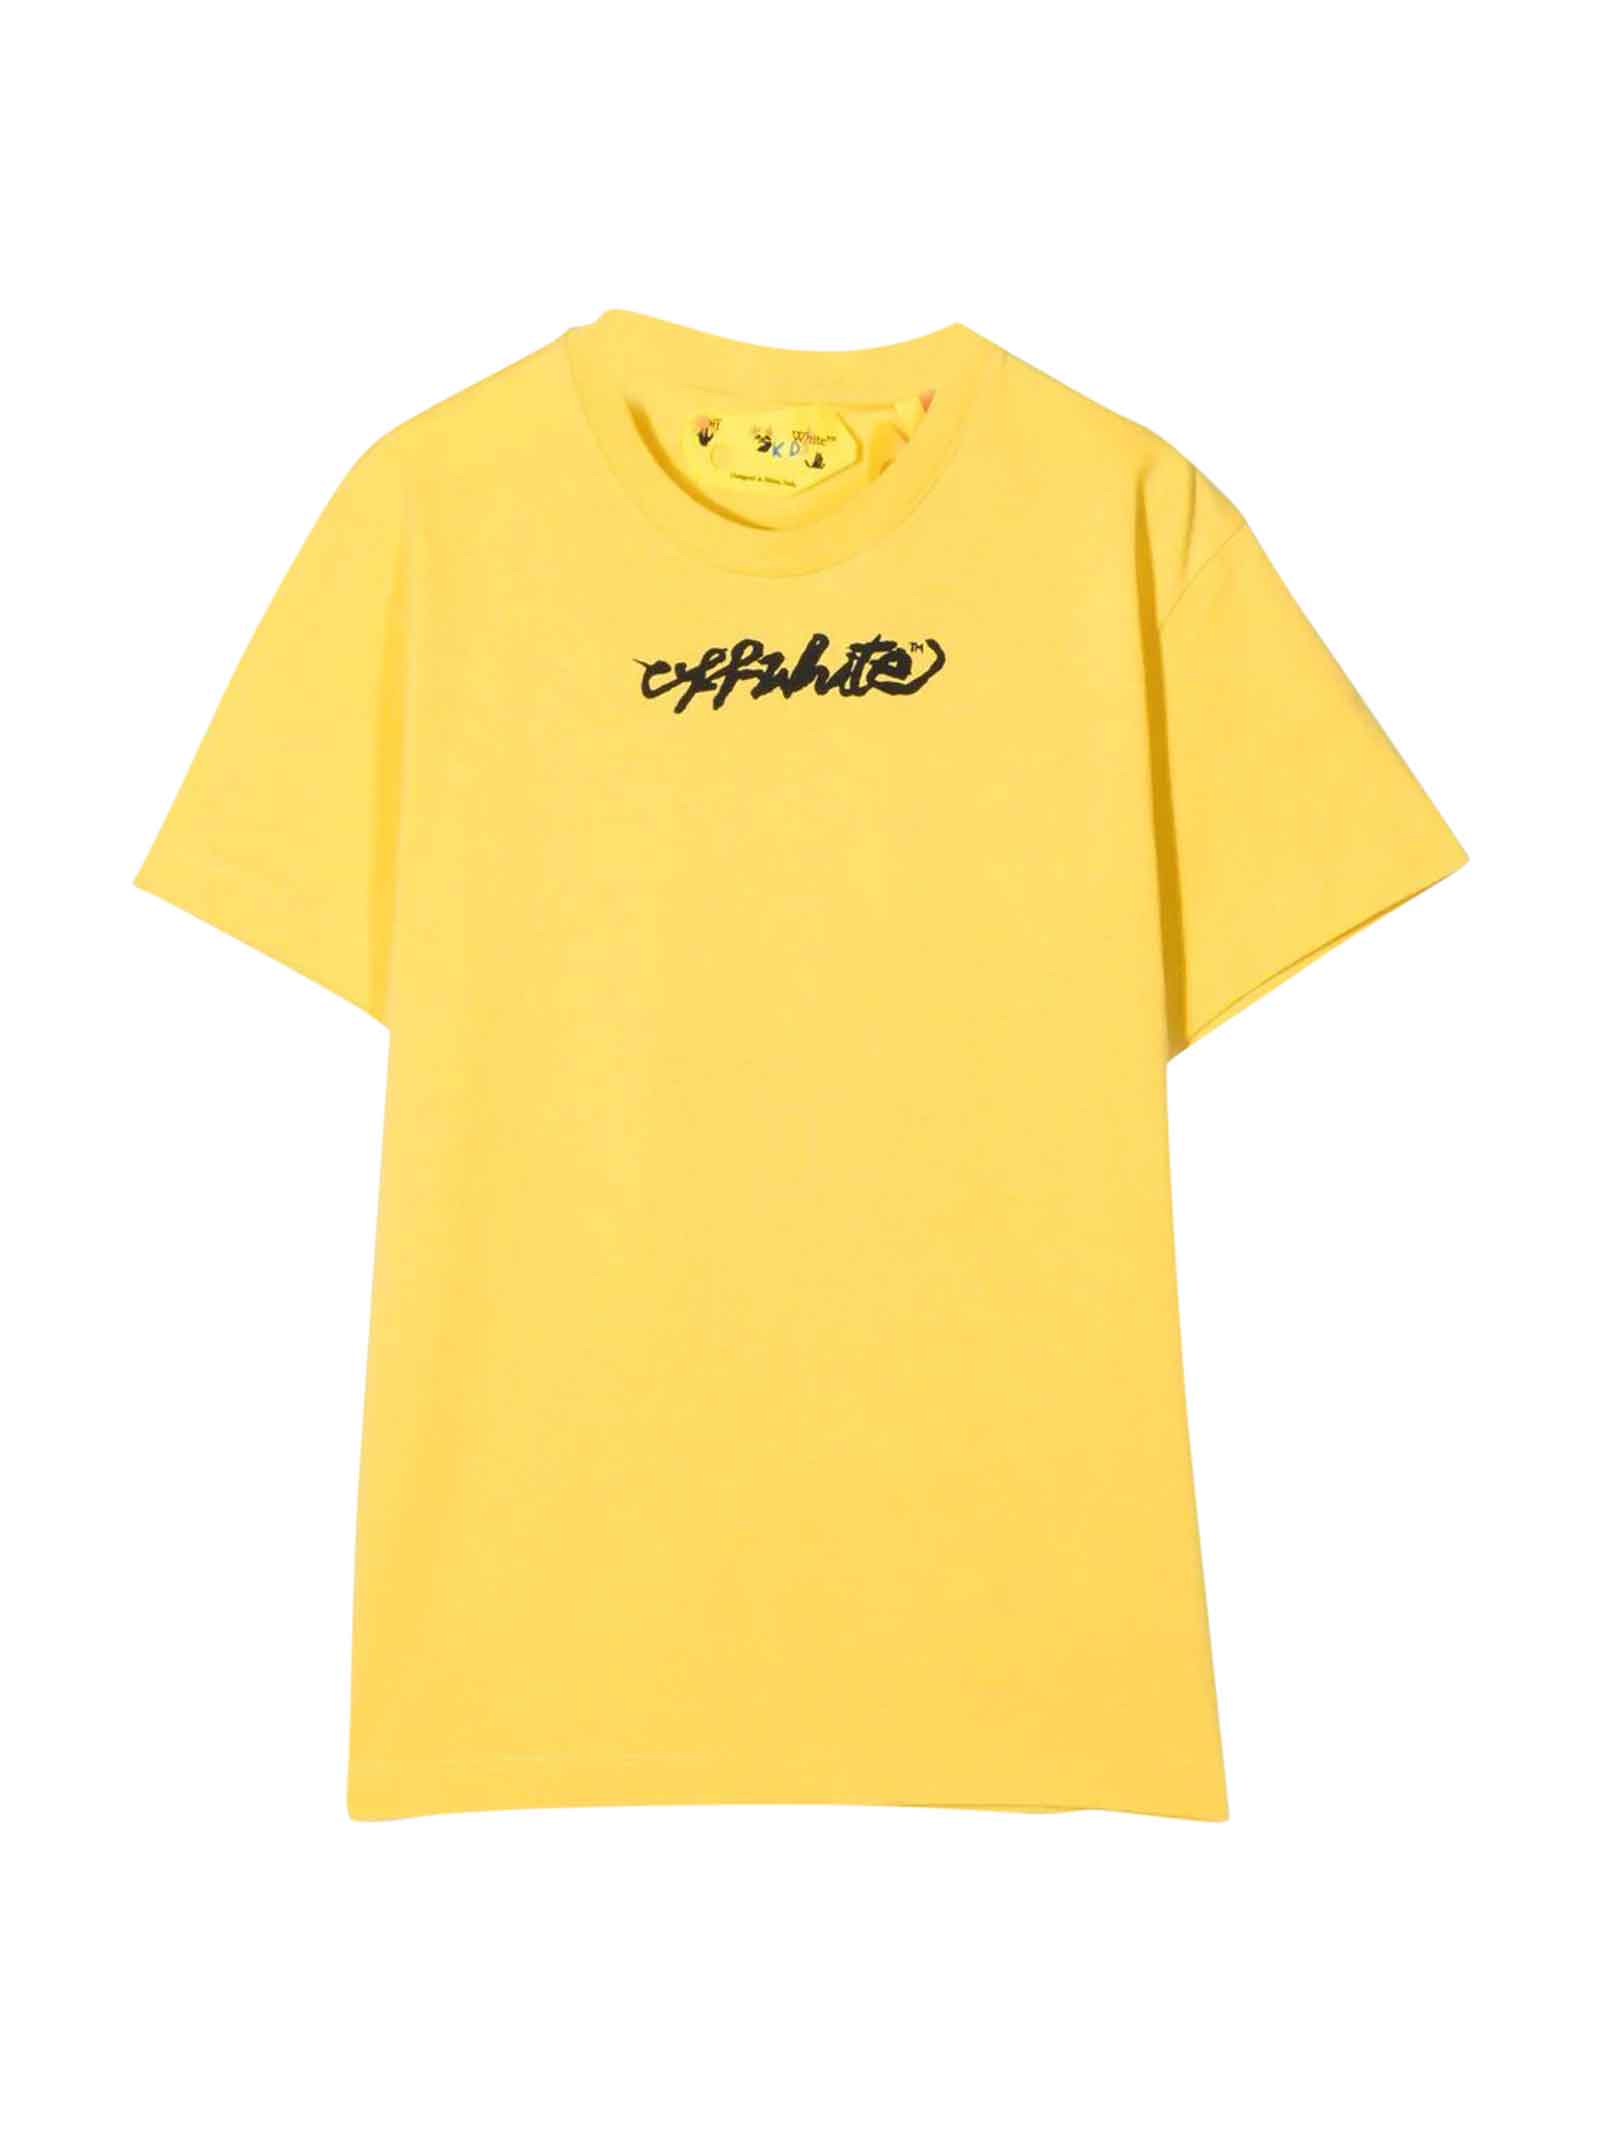 Off-White Yellow T-shirt With Black Print